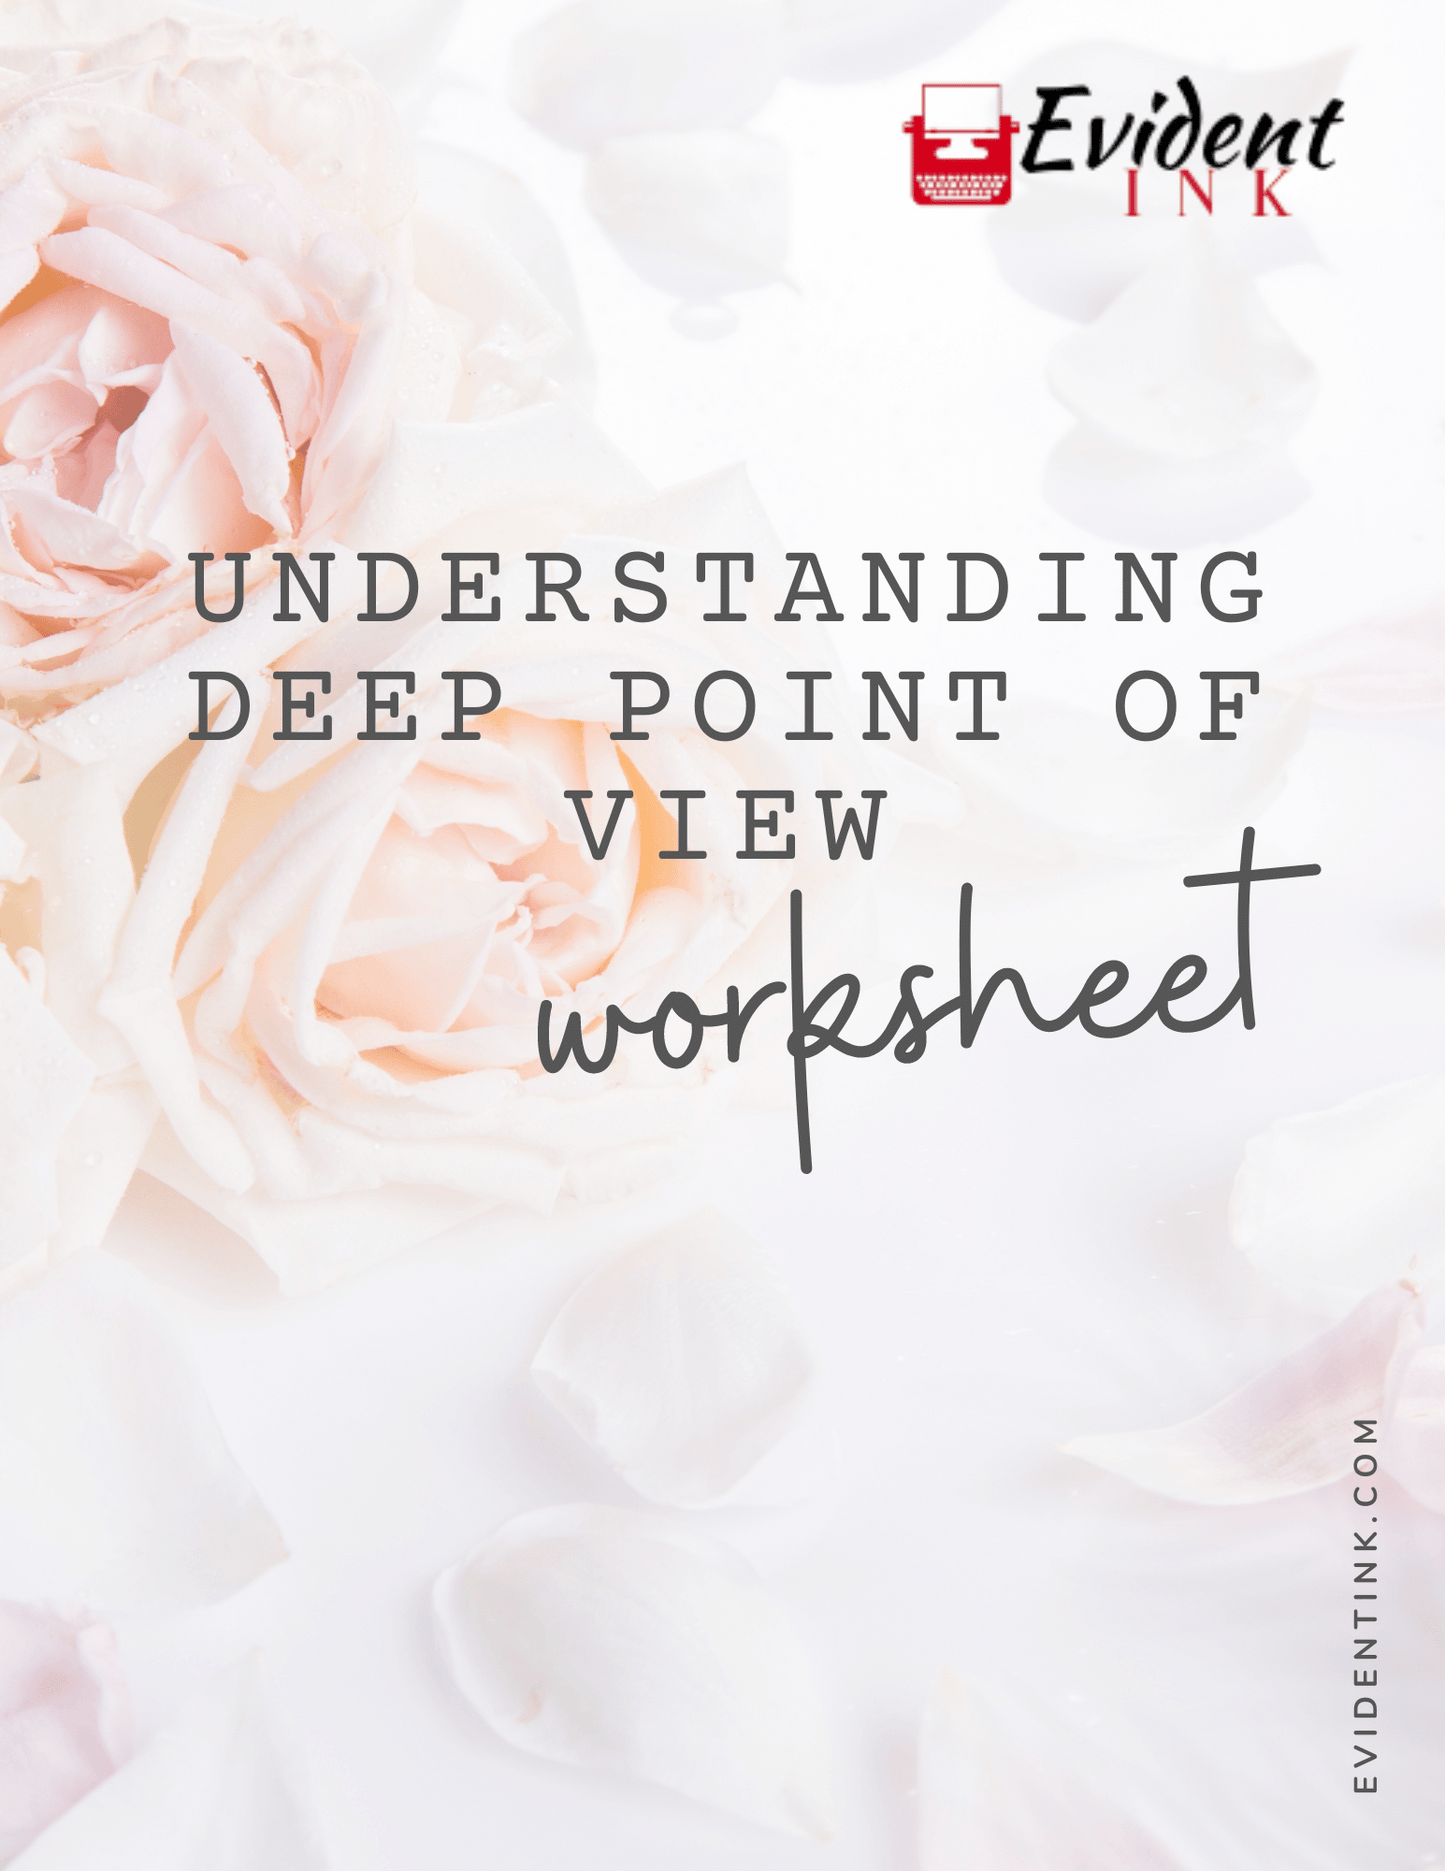 Deep Point of View Worksheet